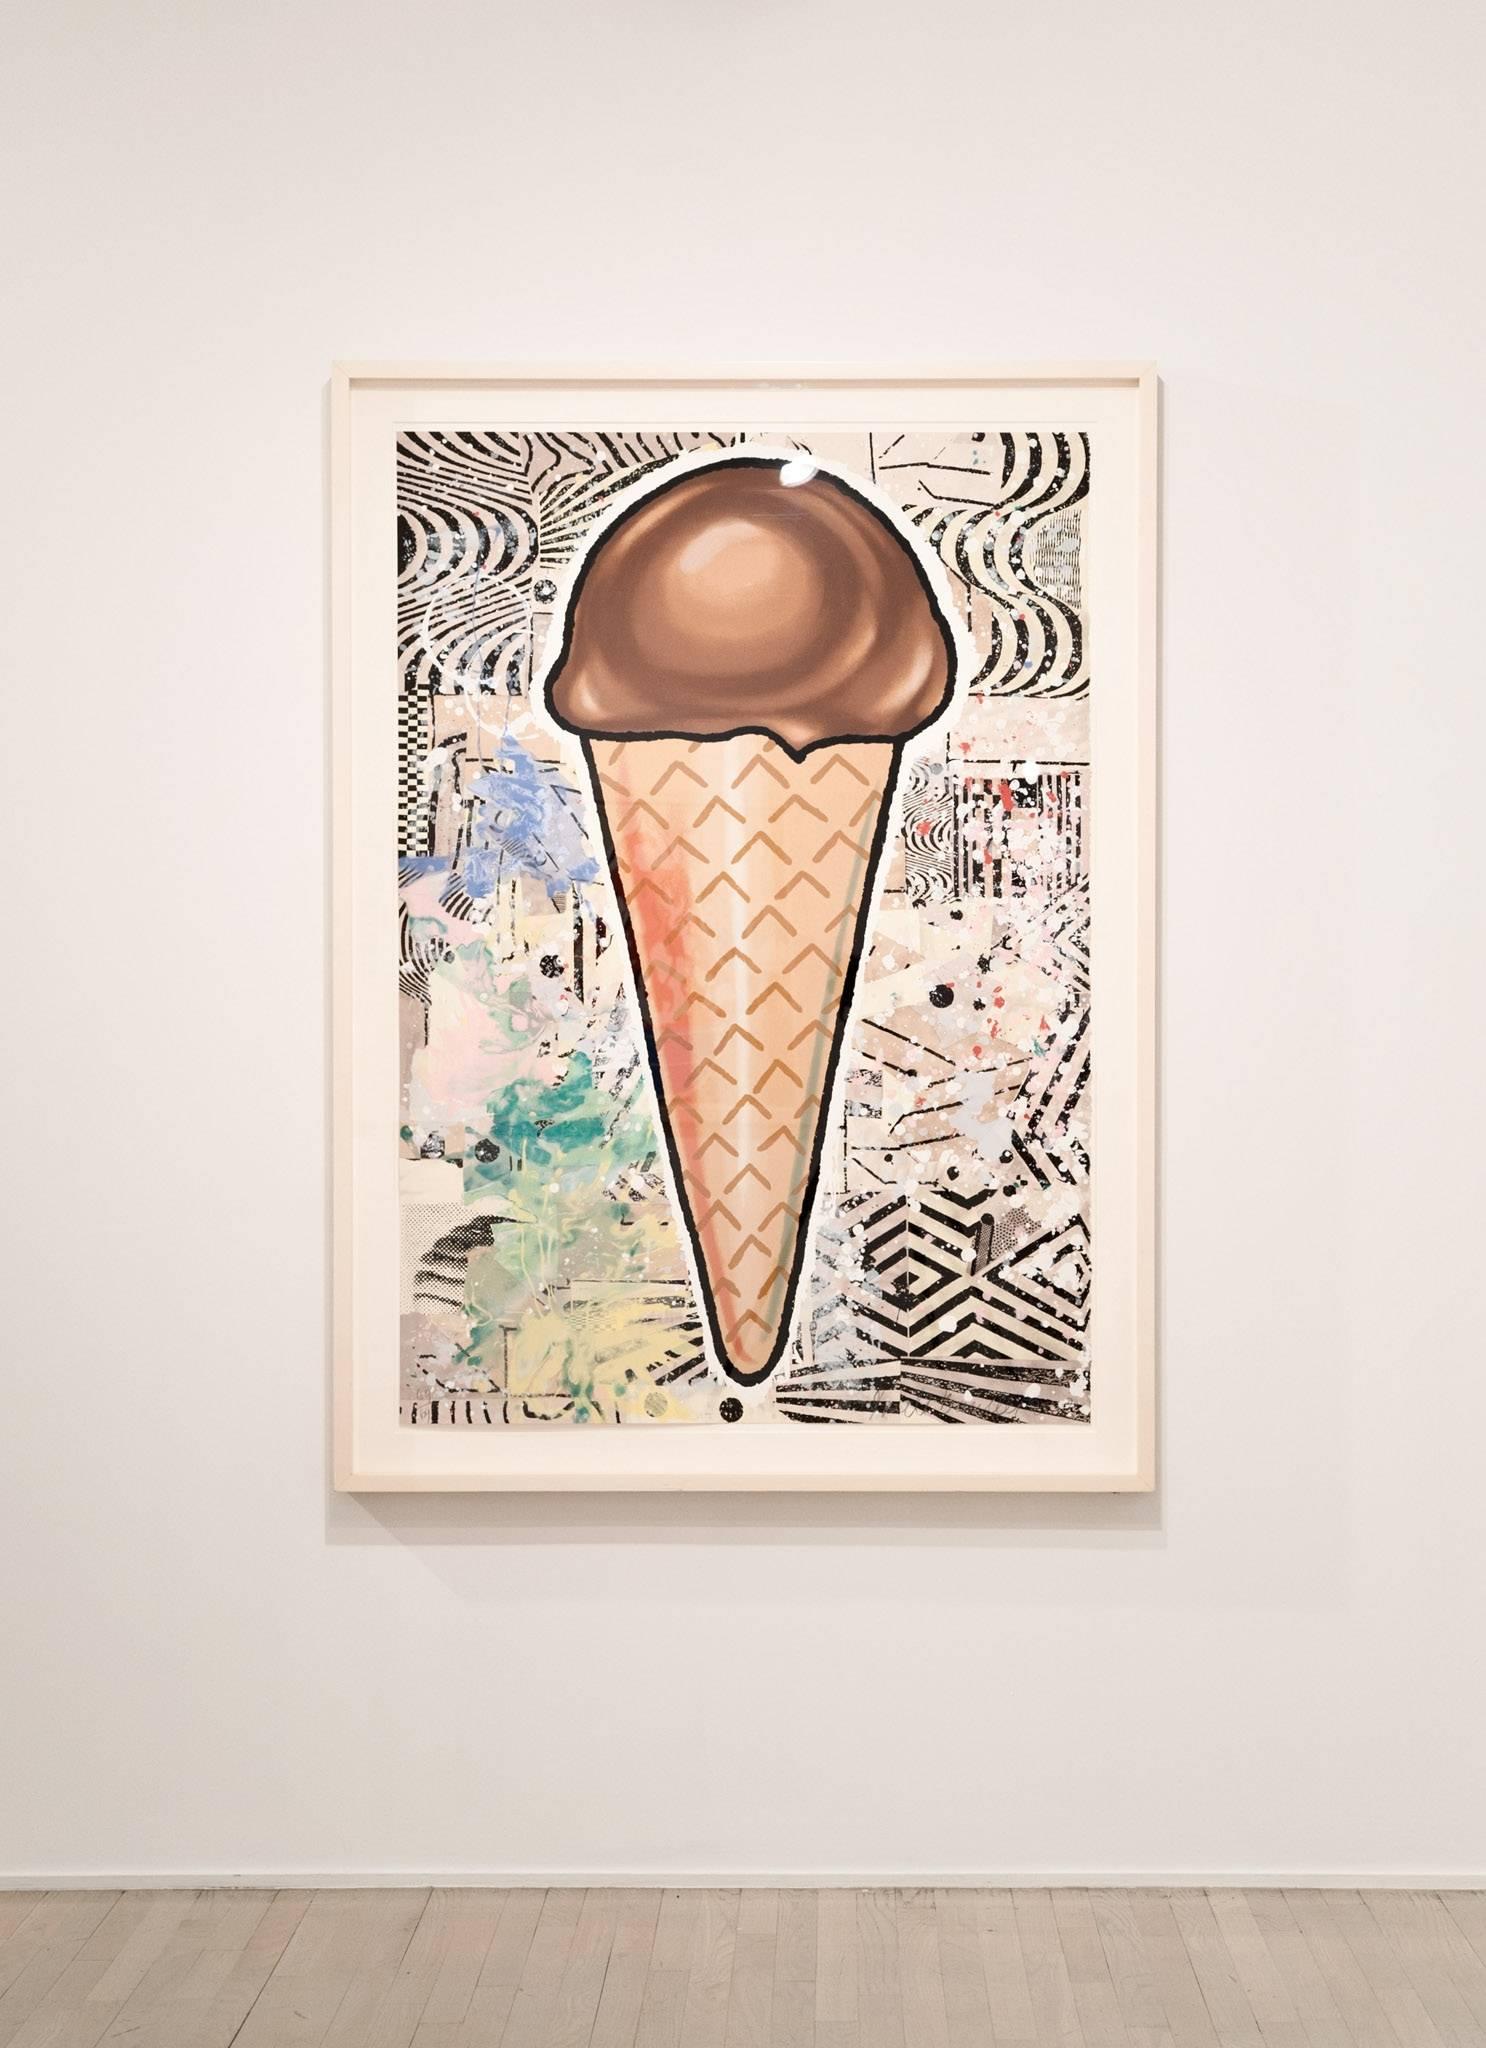 Chocolate Cone - Contemporary Print by Donald Baechler